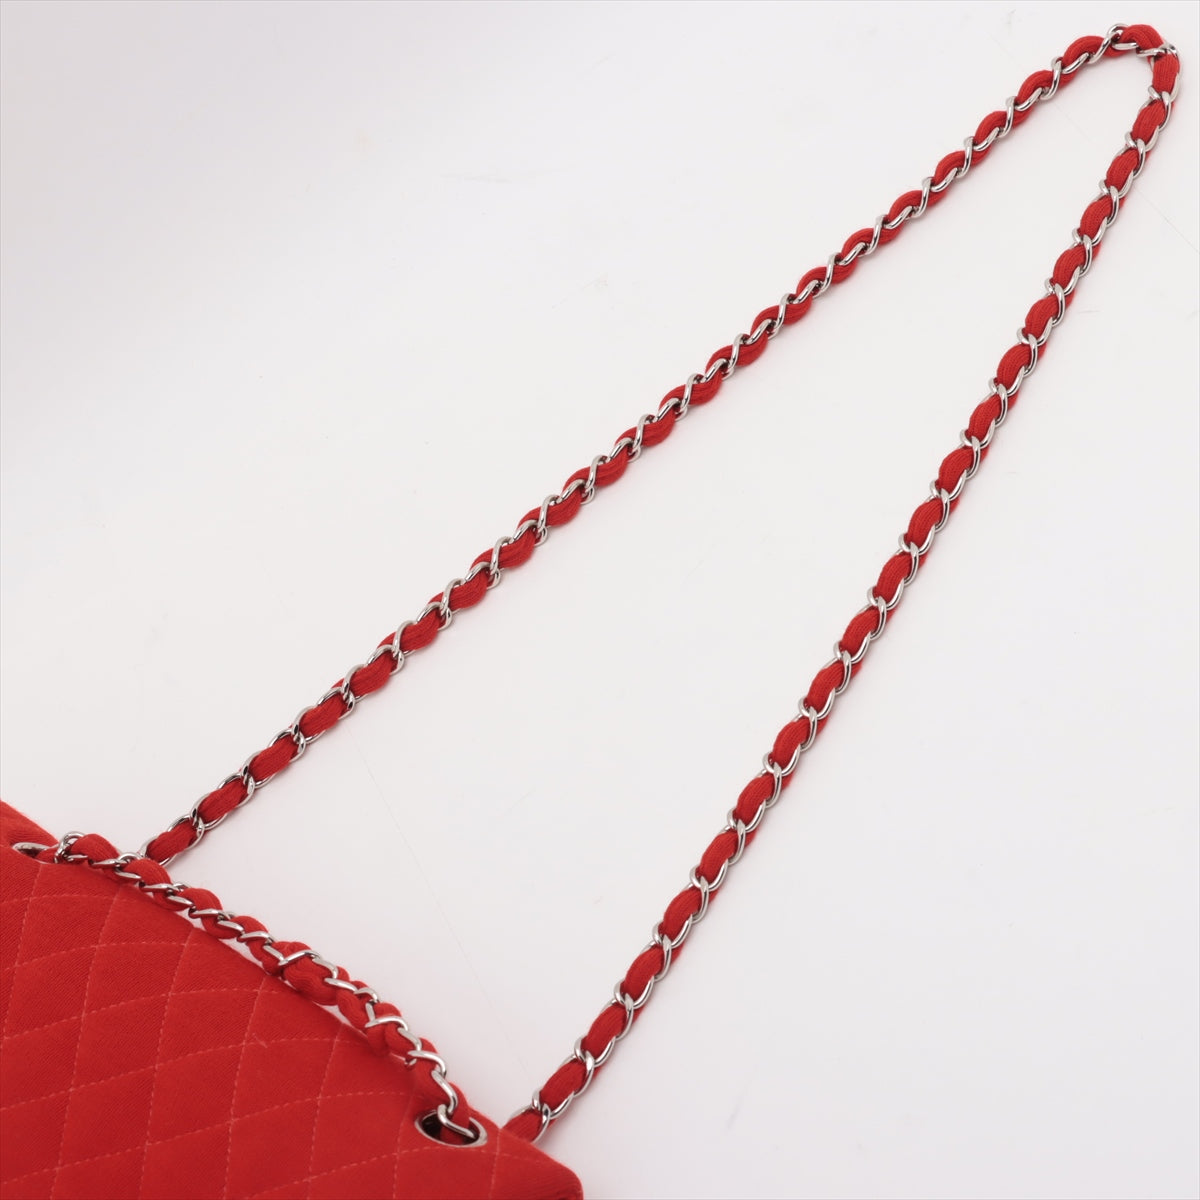 Chanel Matrasse 25 Cotton Double Flap Double Chain Bag Red Silver G  5th A01112